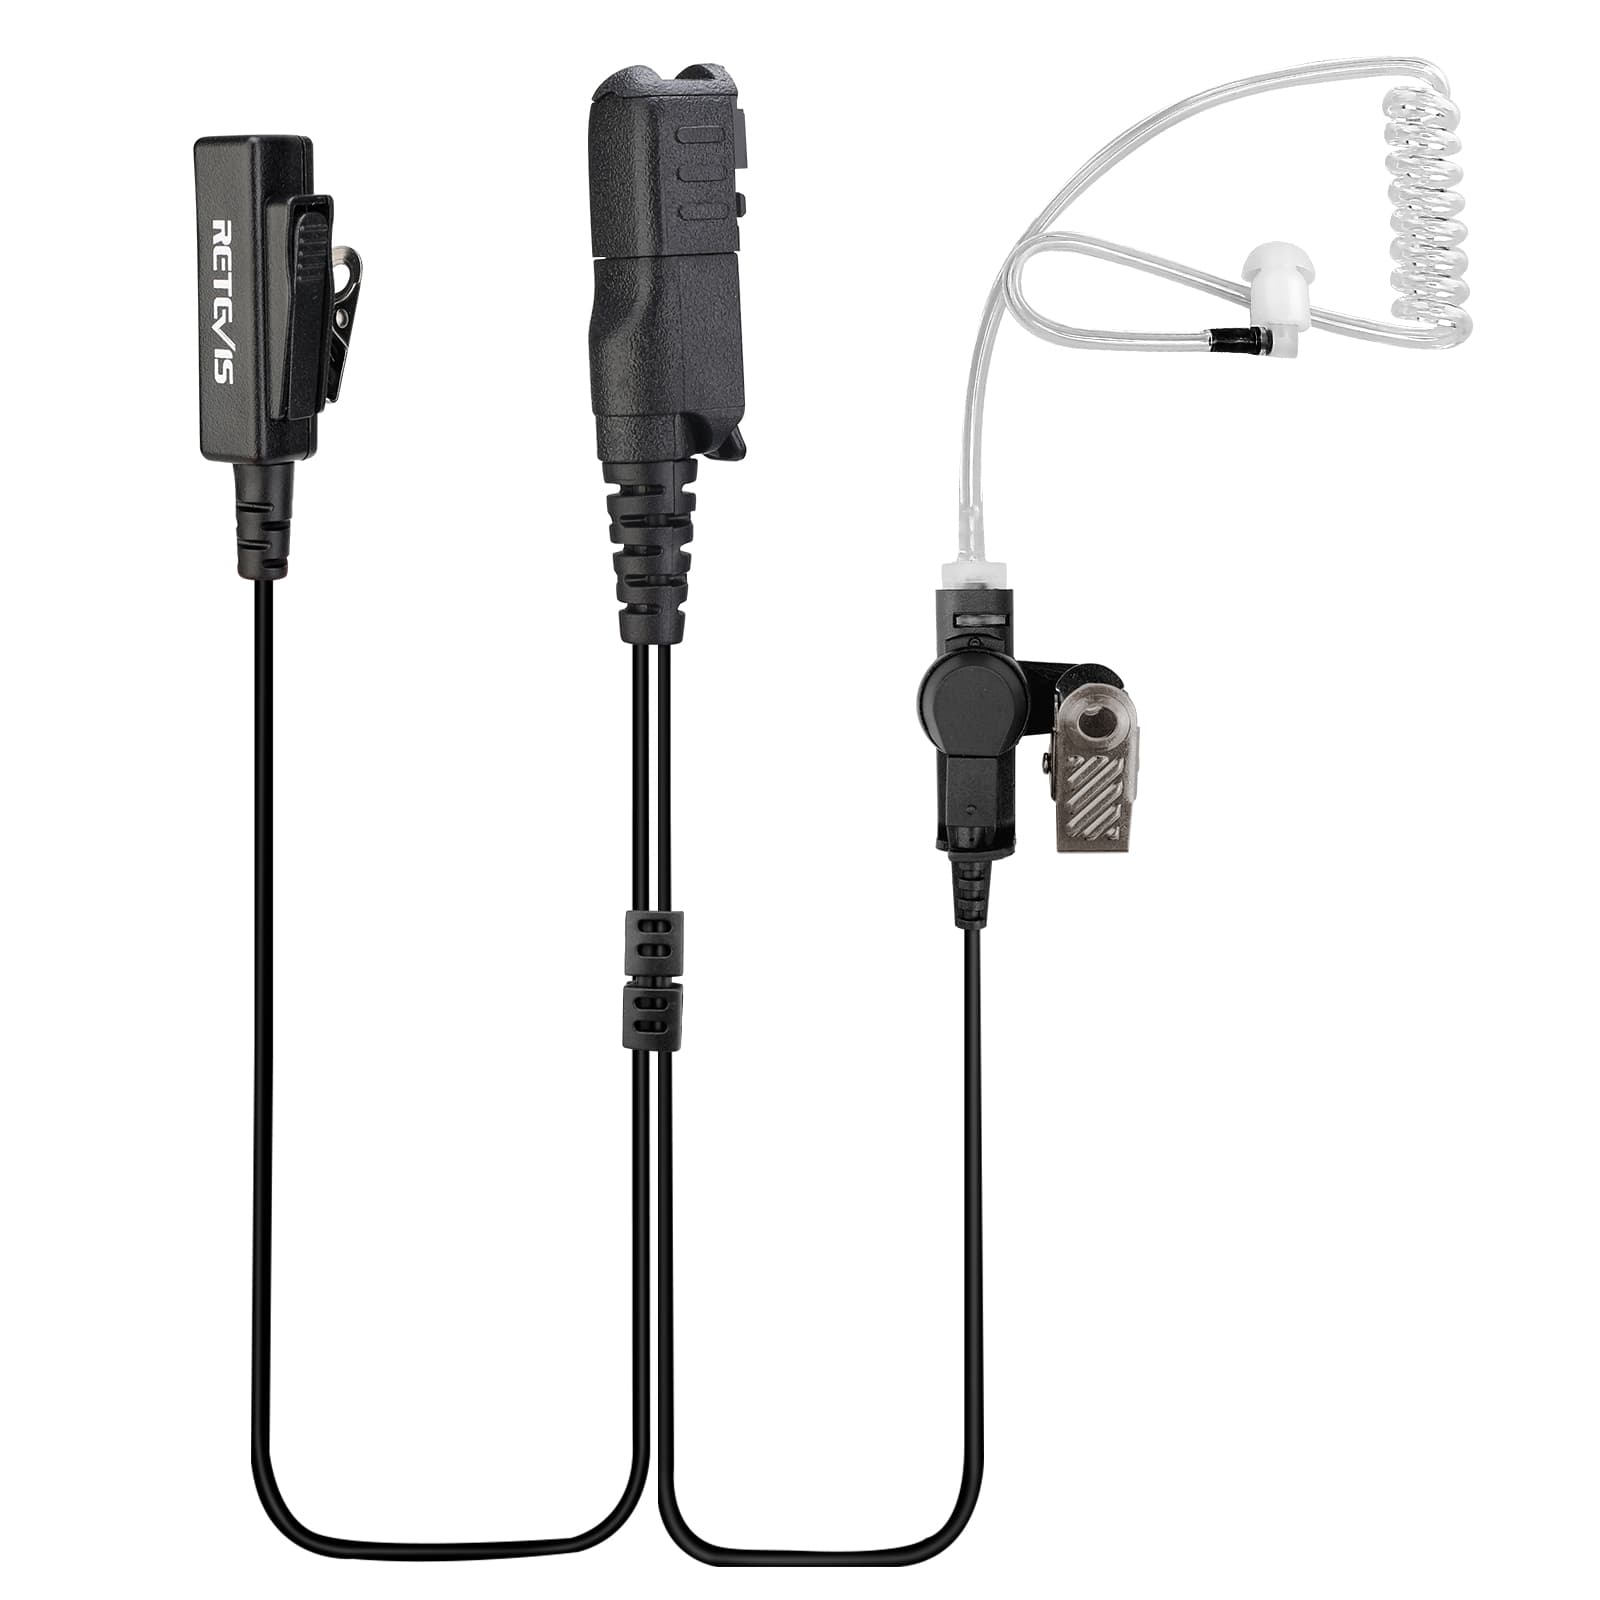 2-Wire Covert Acoustic Tube Earpiece for Motorola XPR3300 DP2400